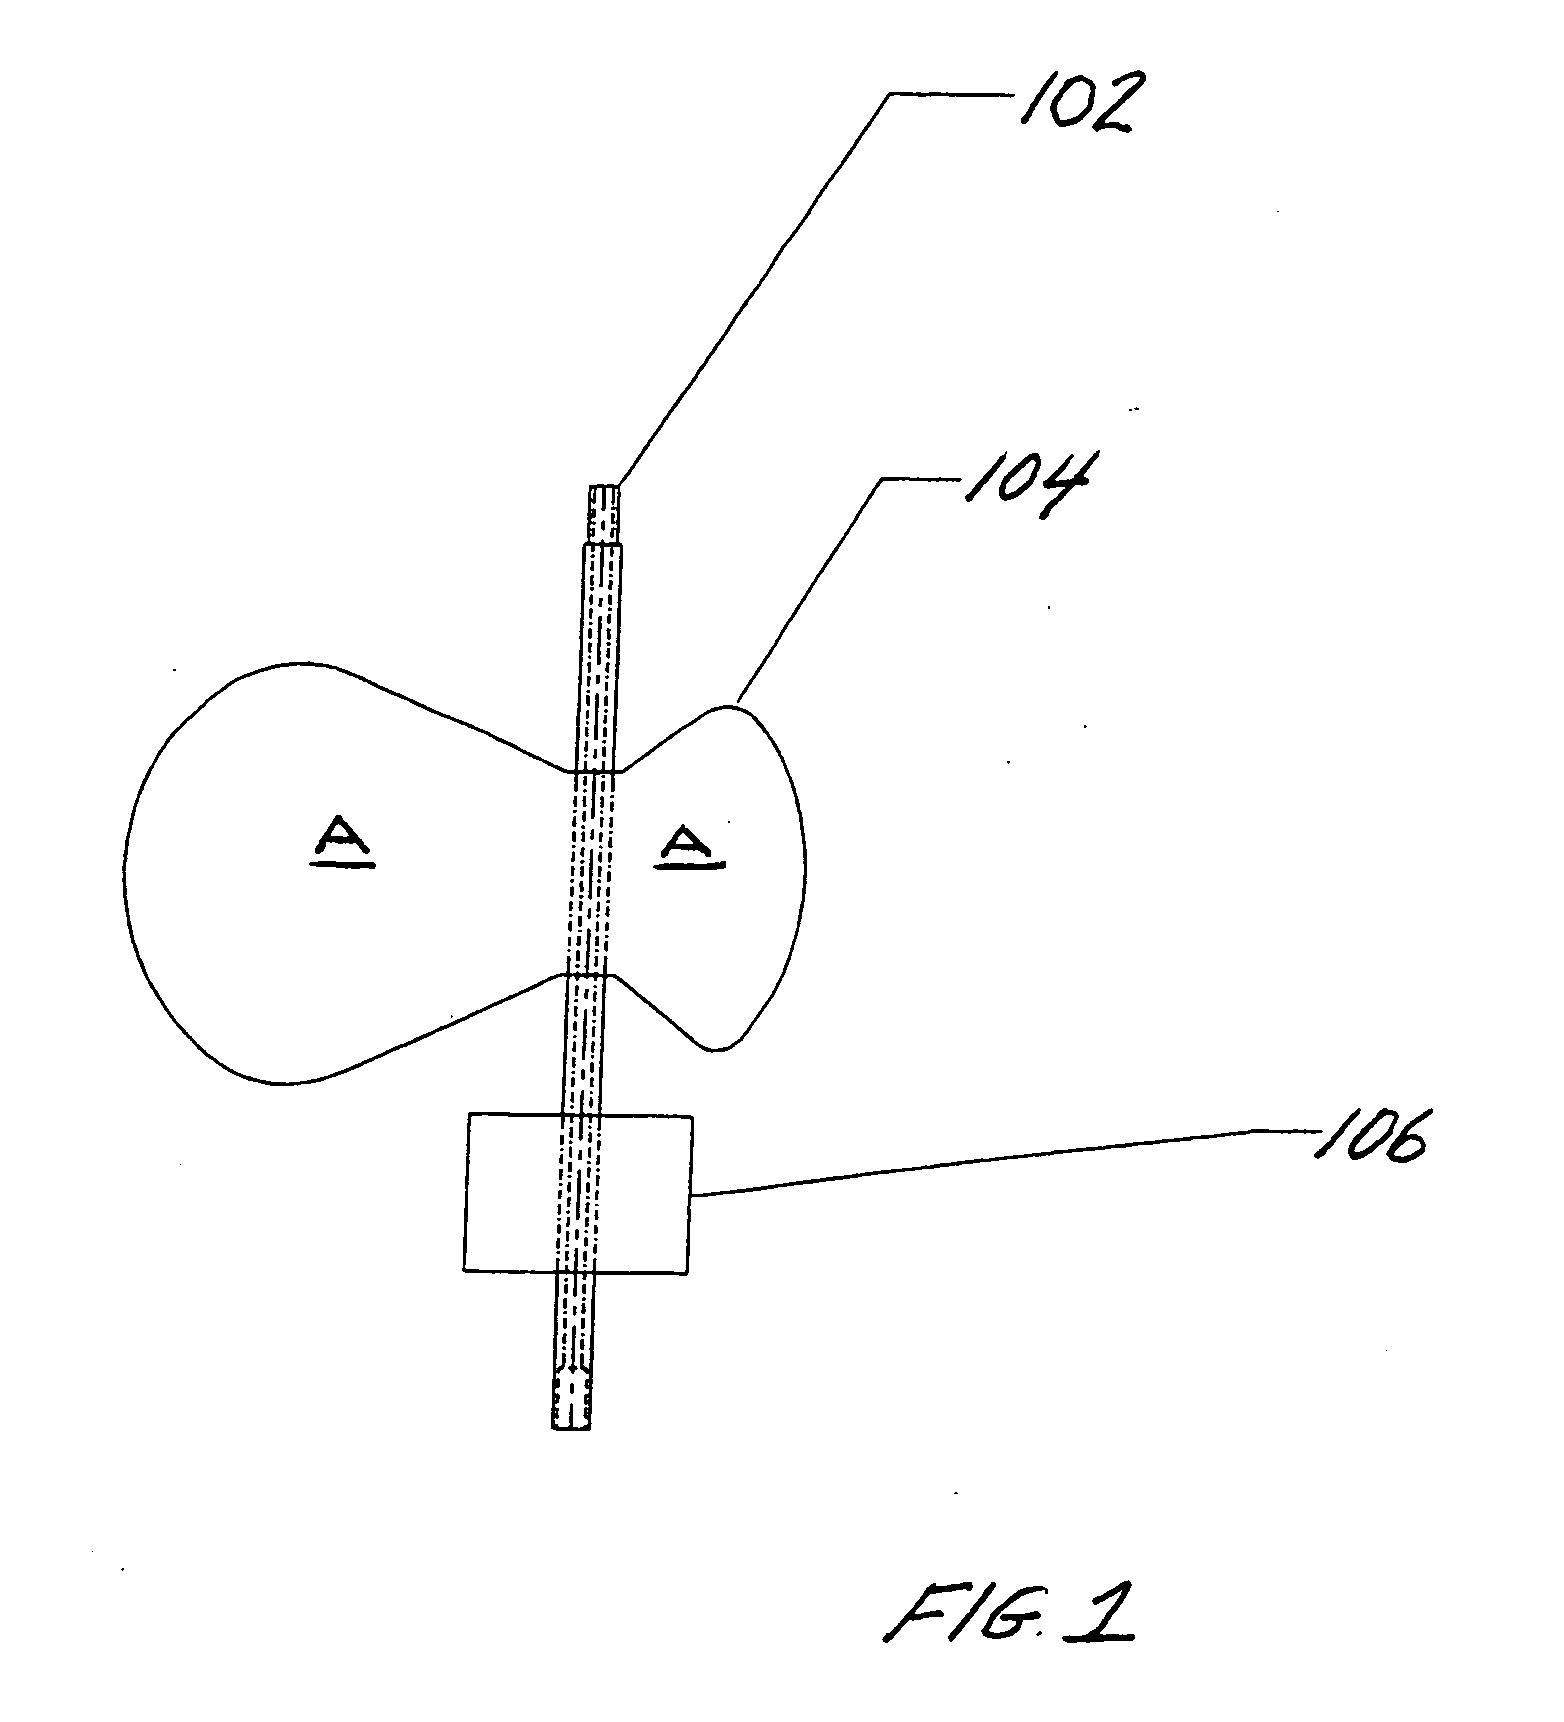 Wind generator with energy enhancer element for providing energy at no wind and low wind conditions